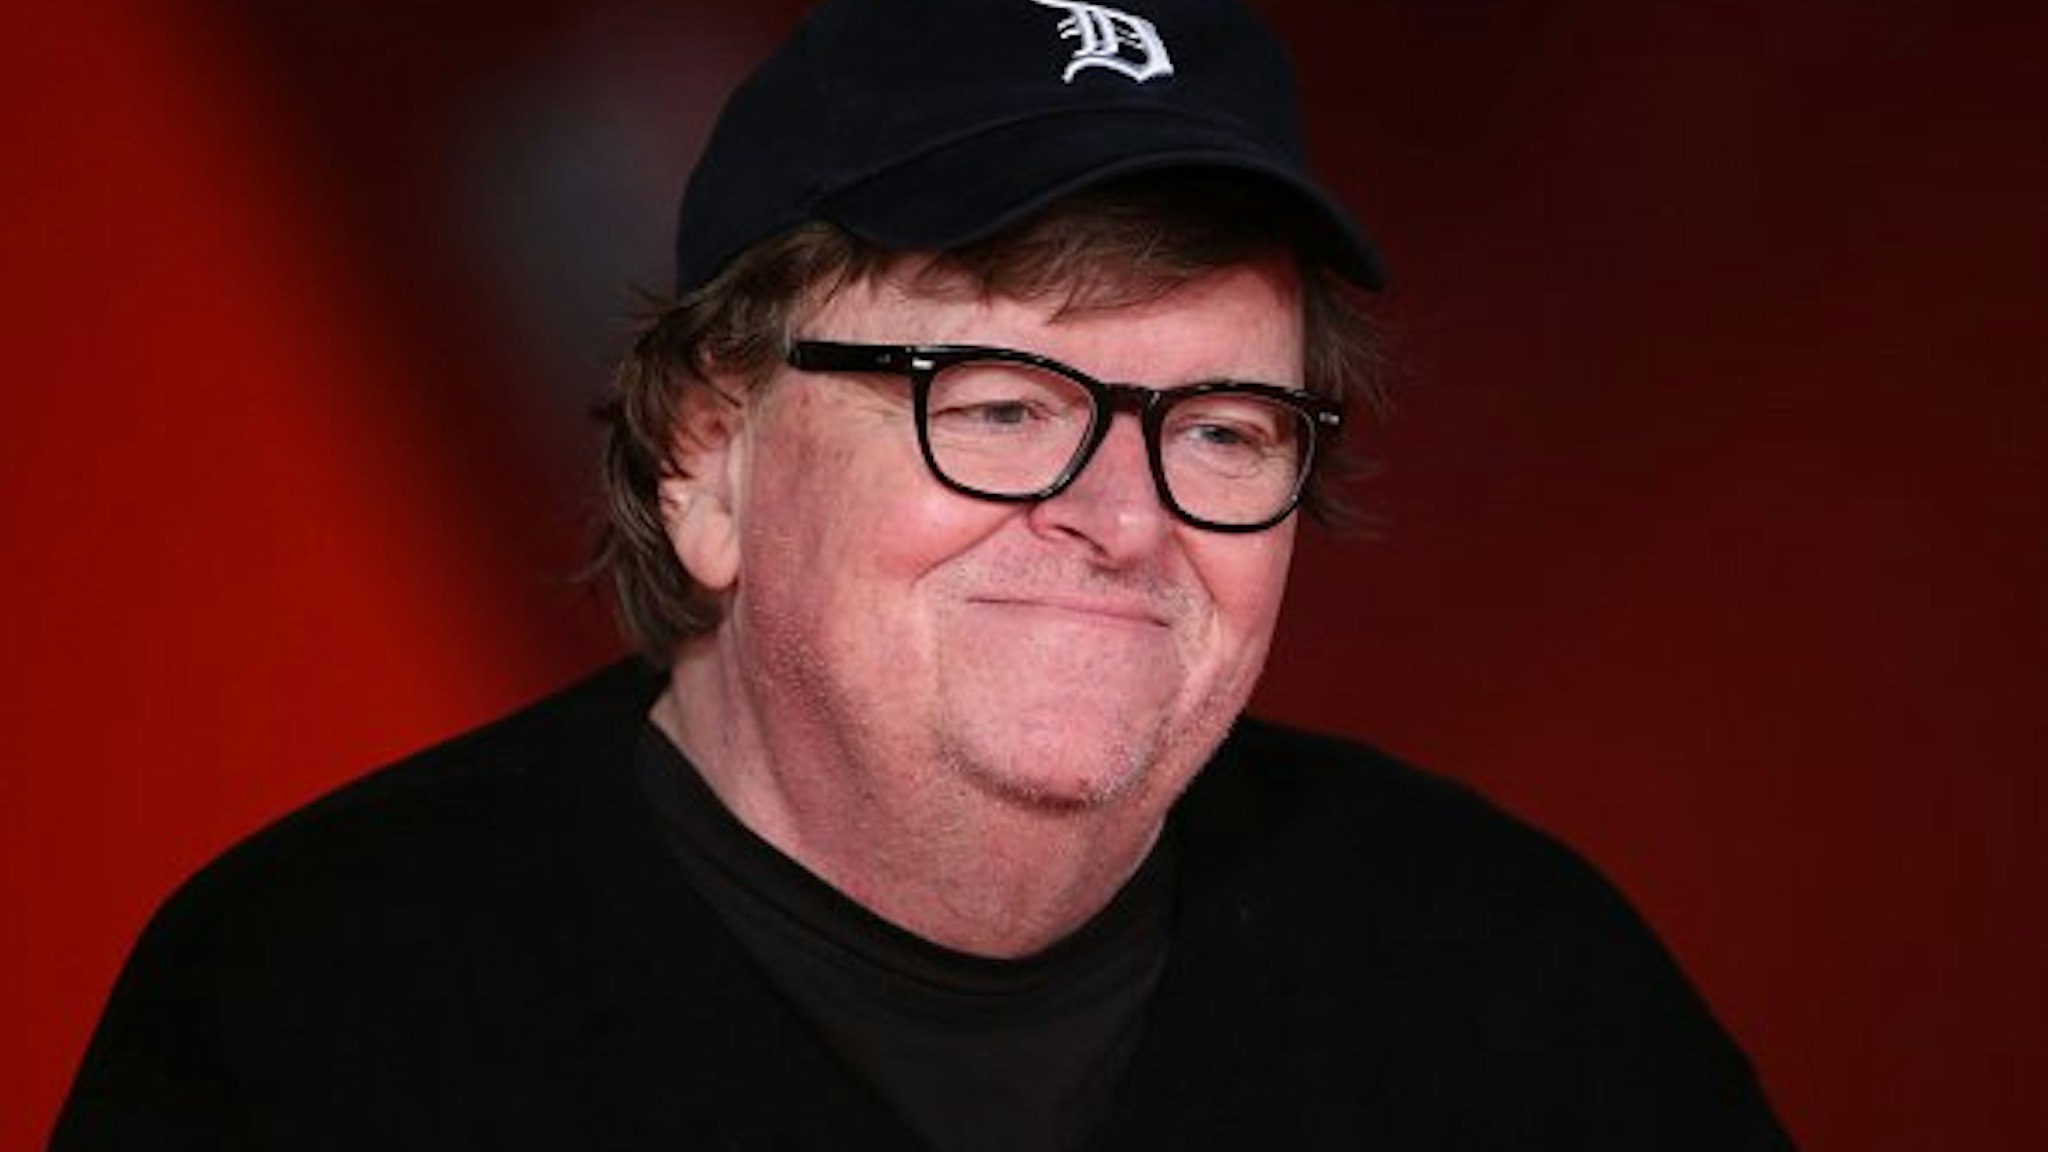 Michael Moore walks the red carpet ahead of the "Fahreneit 11/9" screening during the 13th Rome Film Fest at Auditorium Parco Della Musica on October 20, 2018 in Rome, Italy.